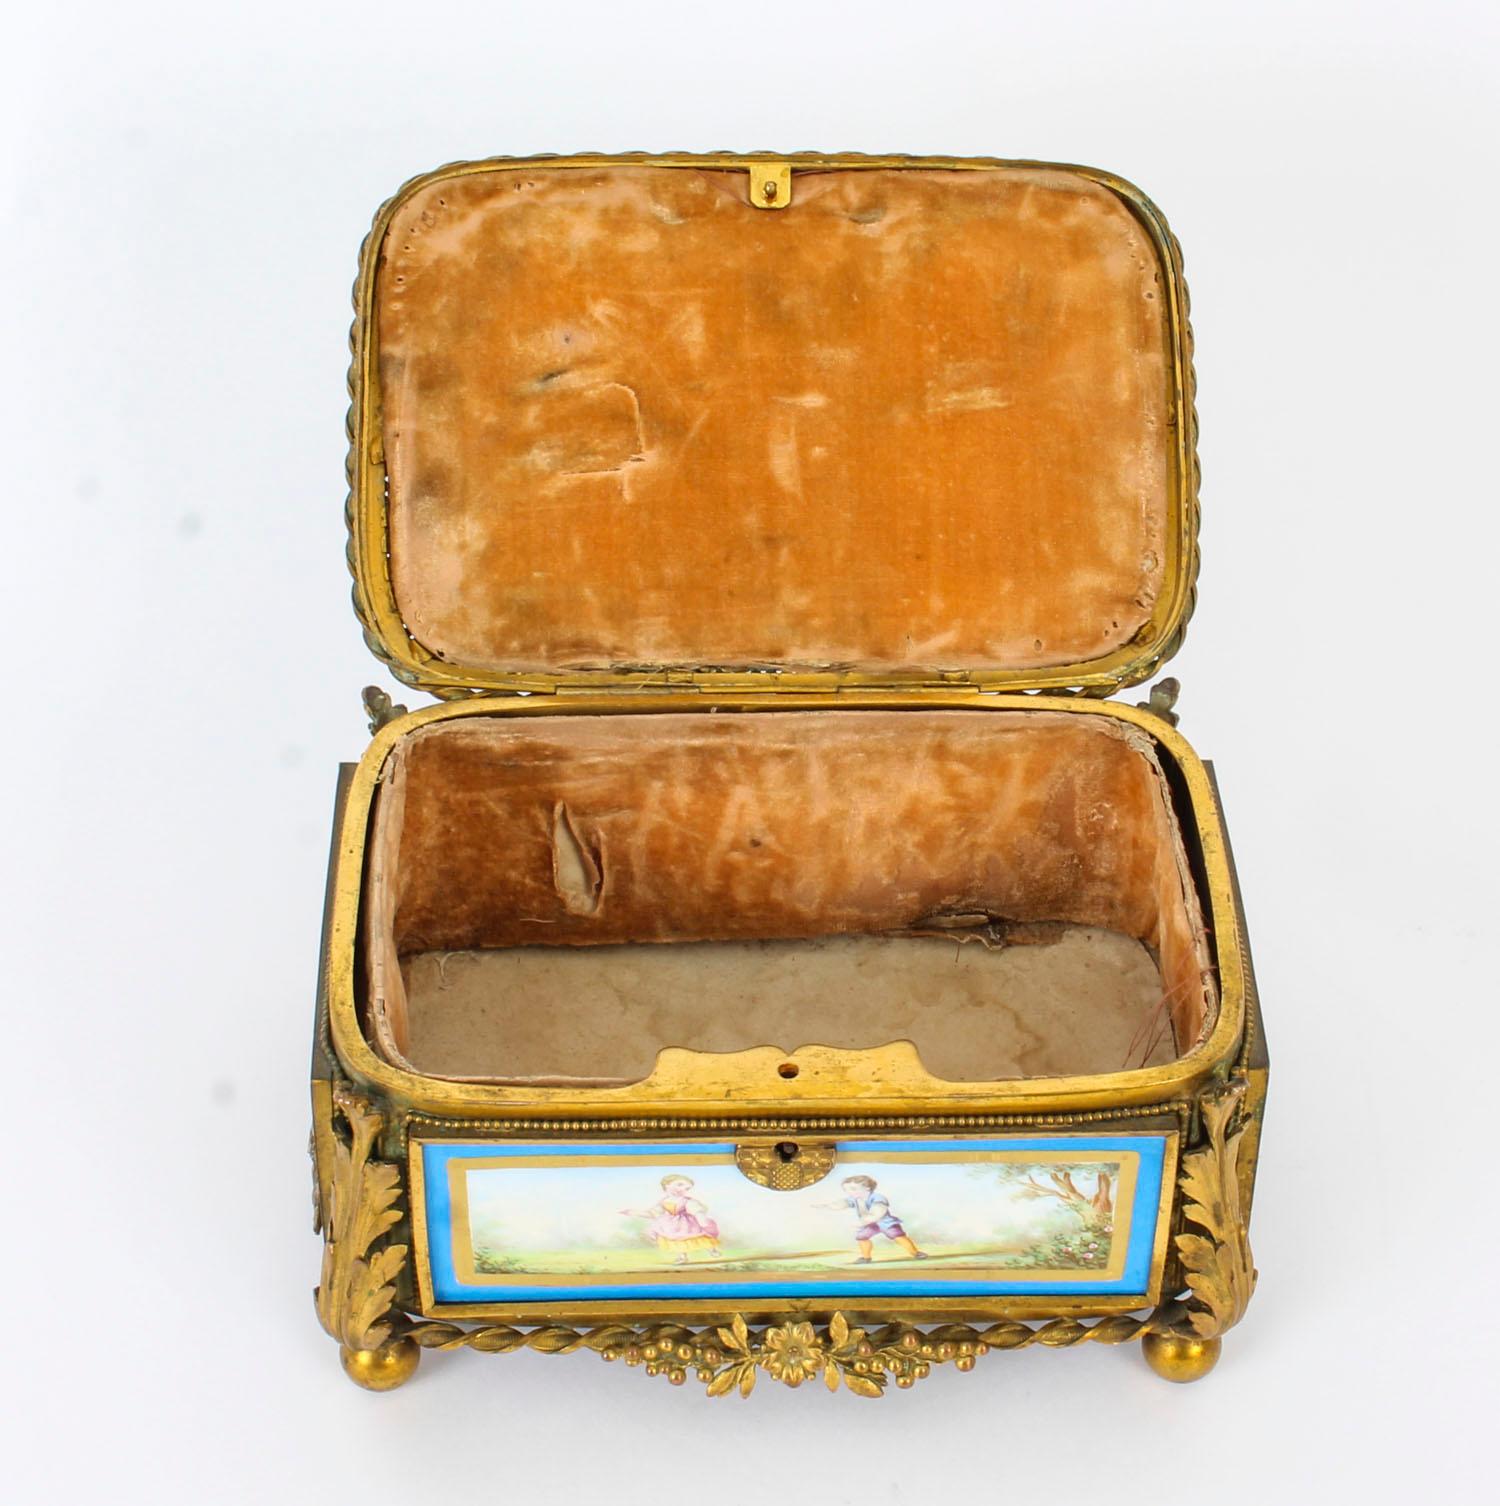 Antique French Sevres Porcelain and Ormolu Jewellery Casket, 19th Century 7